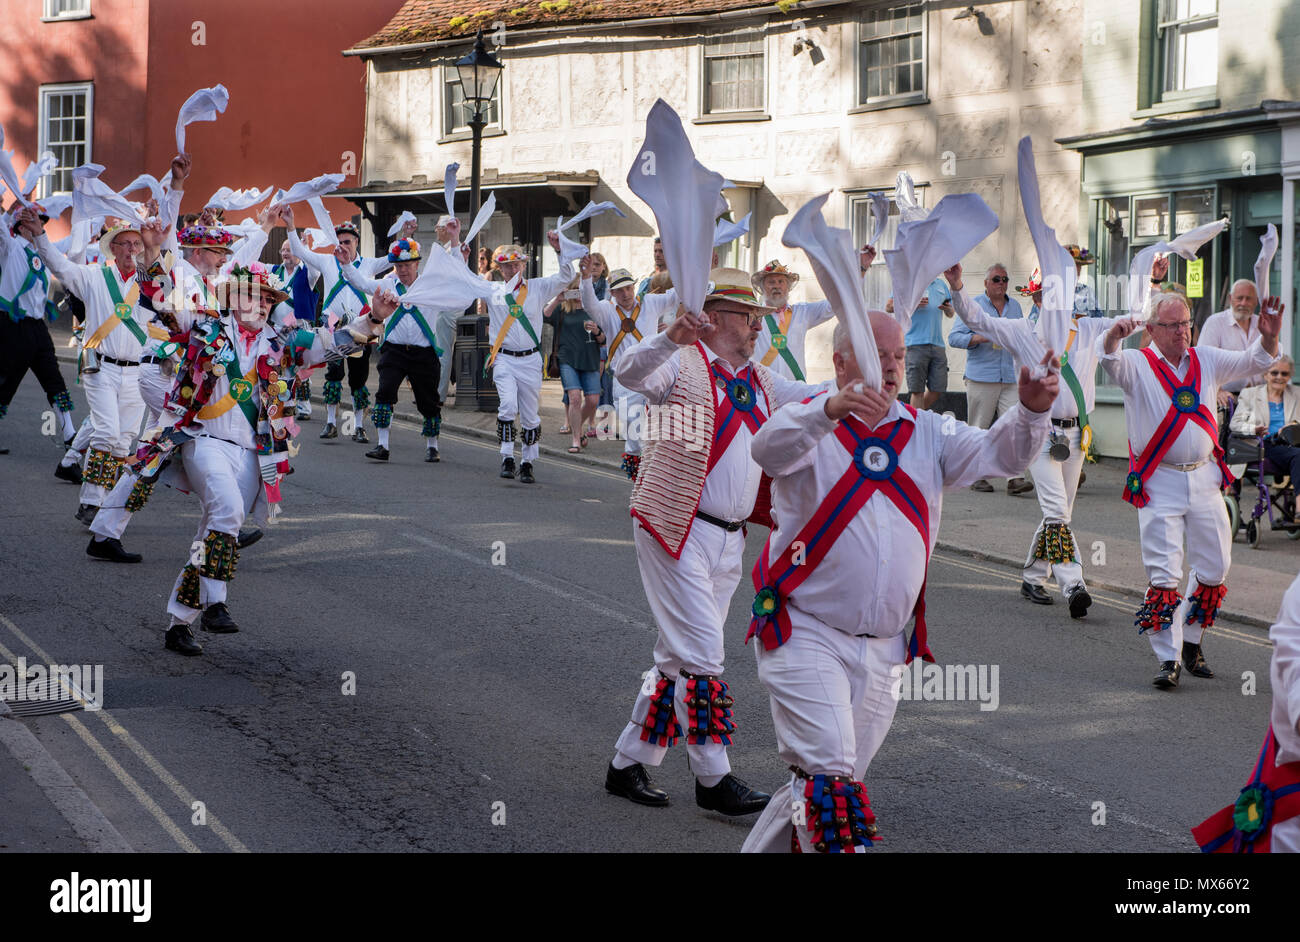 Thaxted Morris Weekend, Thaxted Essex England UK. 2-3 June 2018 The 85th Meeting of the Member Clubs of the Morris Ring hosted by Thaxted Morris Men (who wear red and white stripes) who lead the Saturday evening procession to Town Street in Thaxted after a busy day of dancing in a dozen local pubs in surrounding villages in North West Essex. Credit: BRIAN HARRIS/Alamy Live News Stock Photo